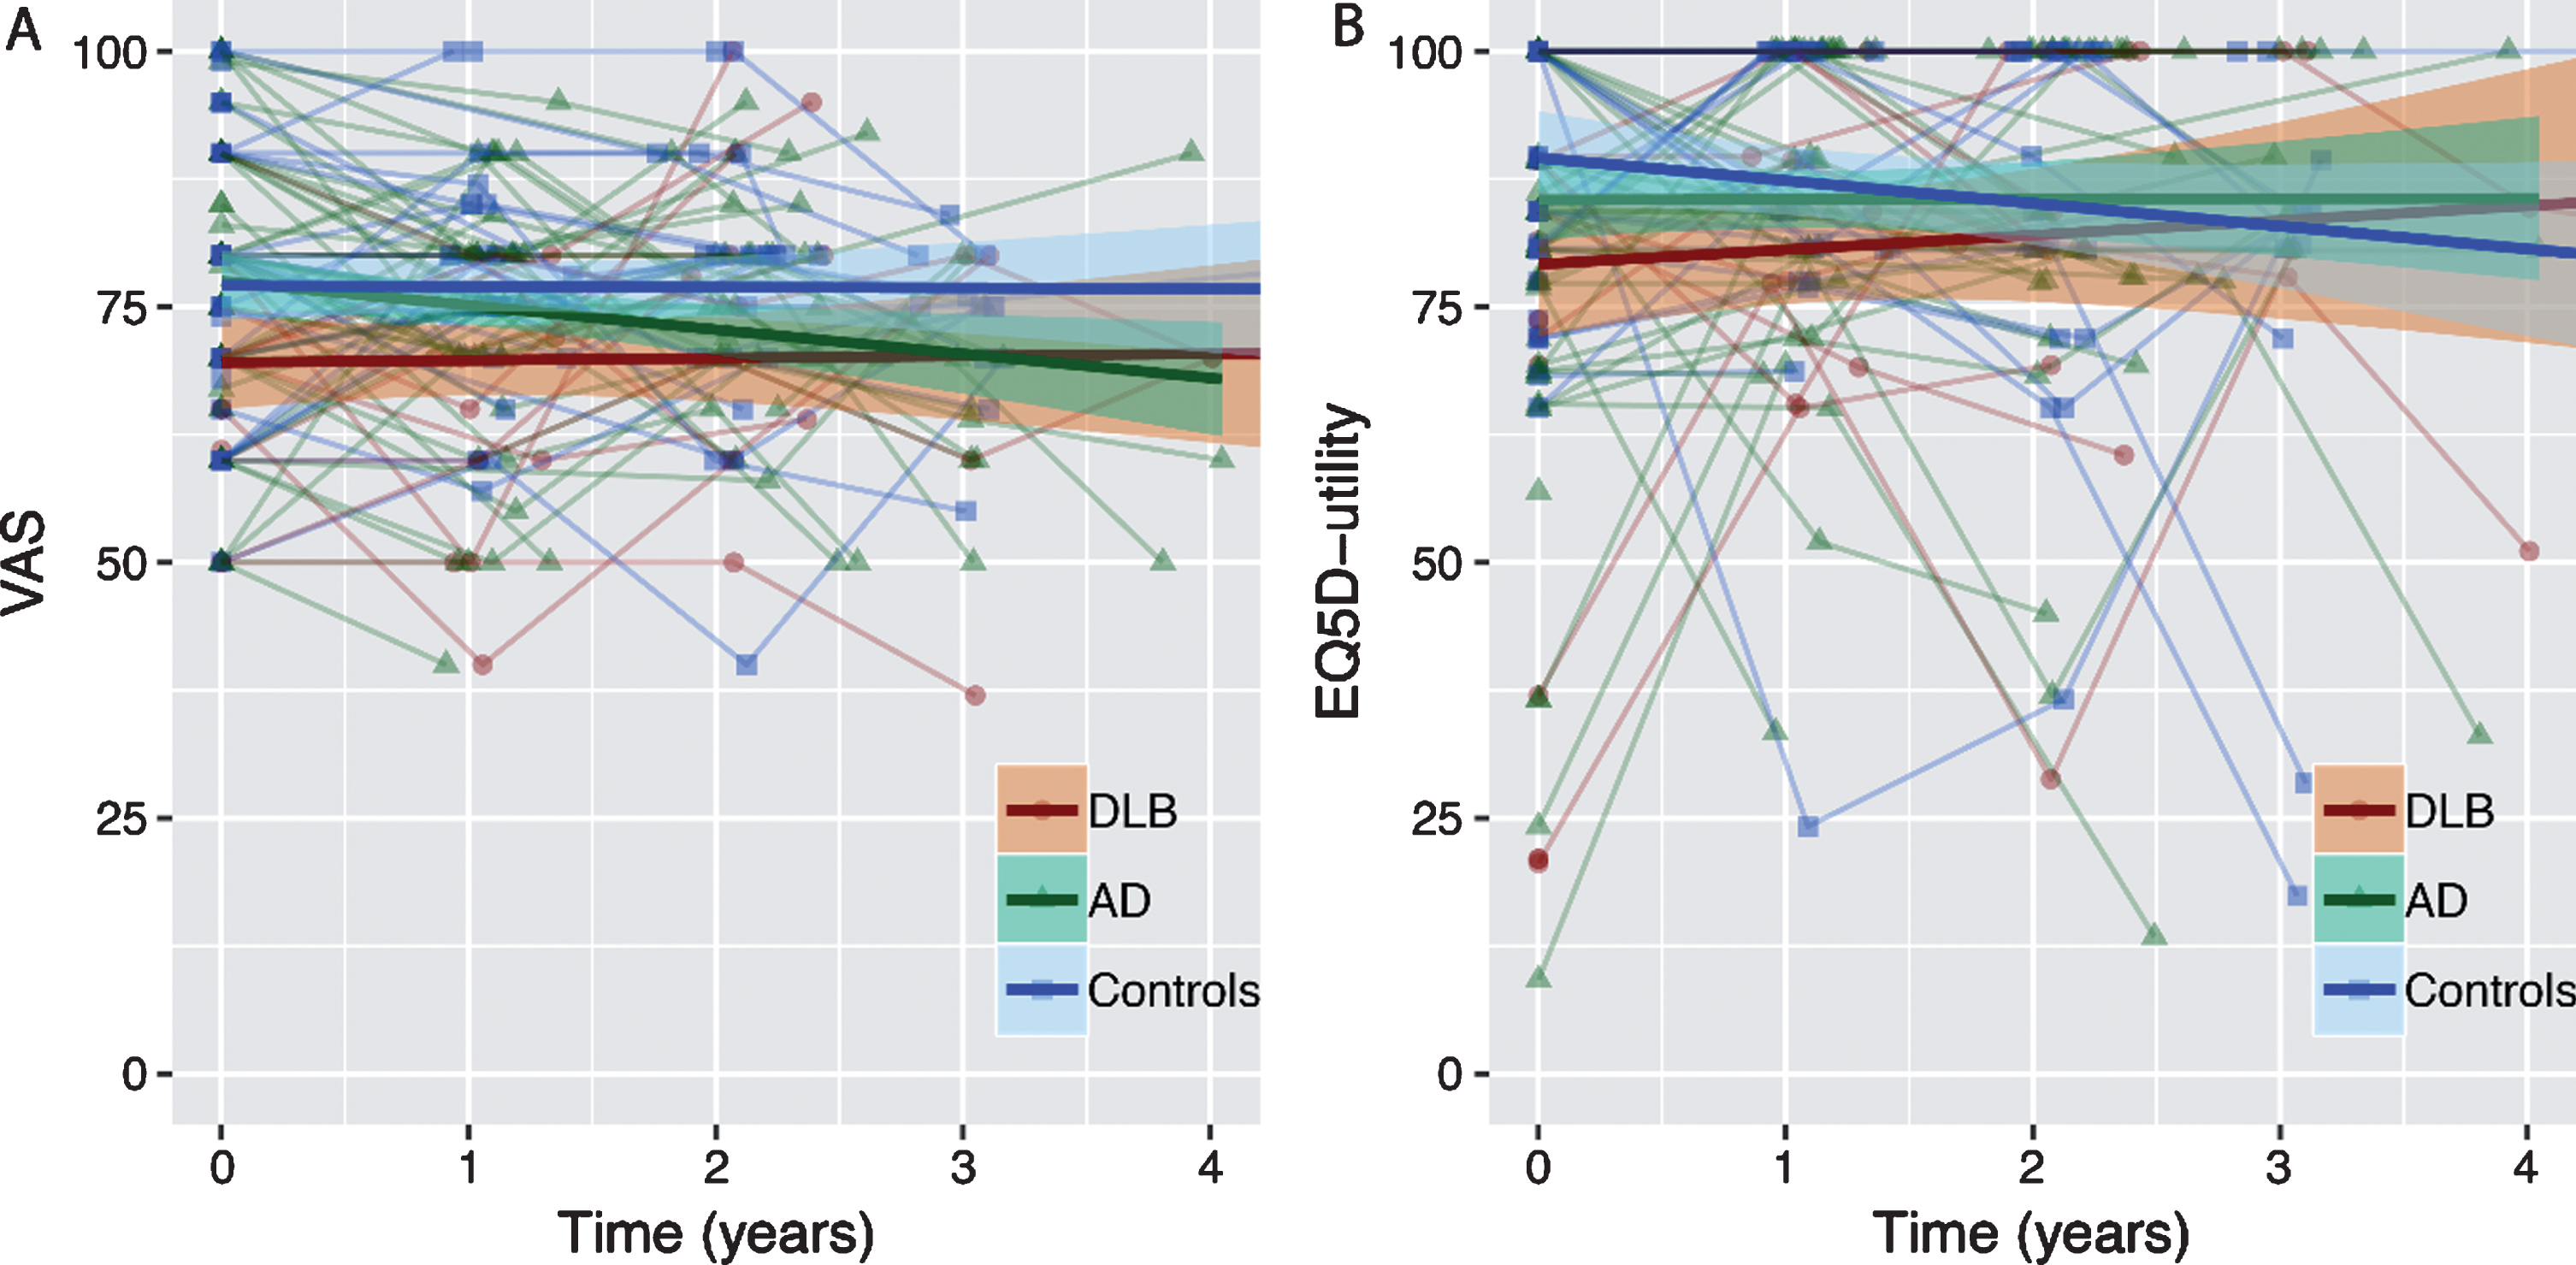 Estimated trajectories of QoL over time for patients with DLB, AD, and controls. Data represent individual trajectories of raw QoL-scores over time. Regression lines represent estimated group trajectories over time in years with 95% confidence intervals. A) Trajectories of Visual Analogue Scale (VAS) over time. B) Trajectories of EQ5D-utility scores over time.